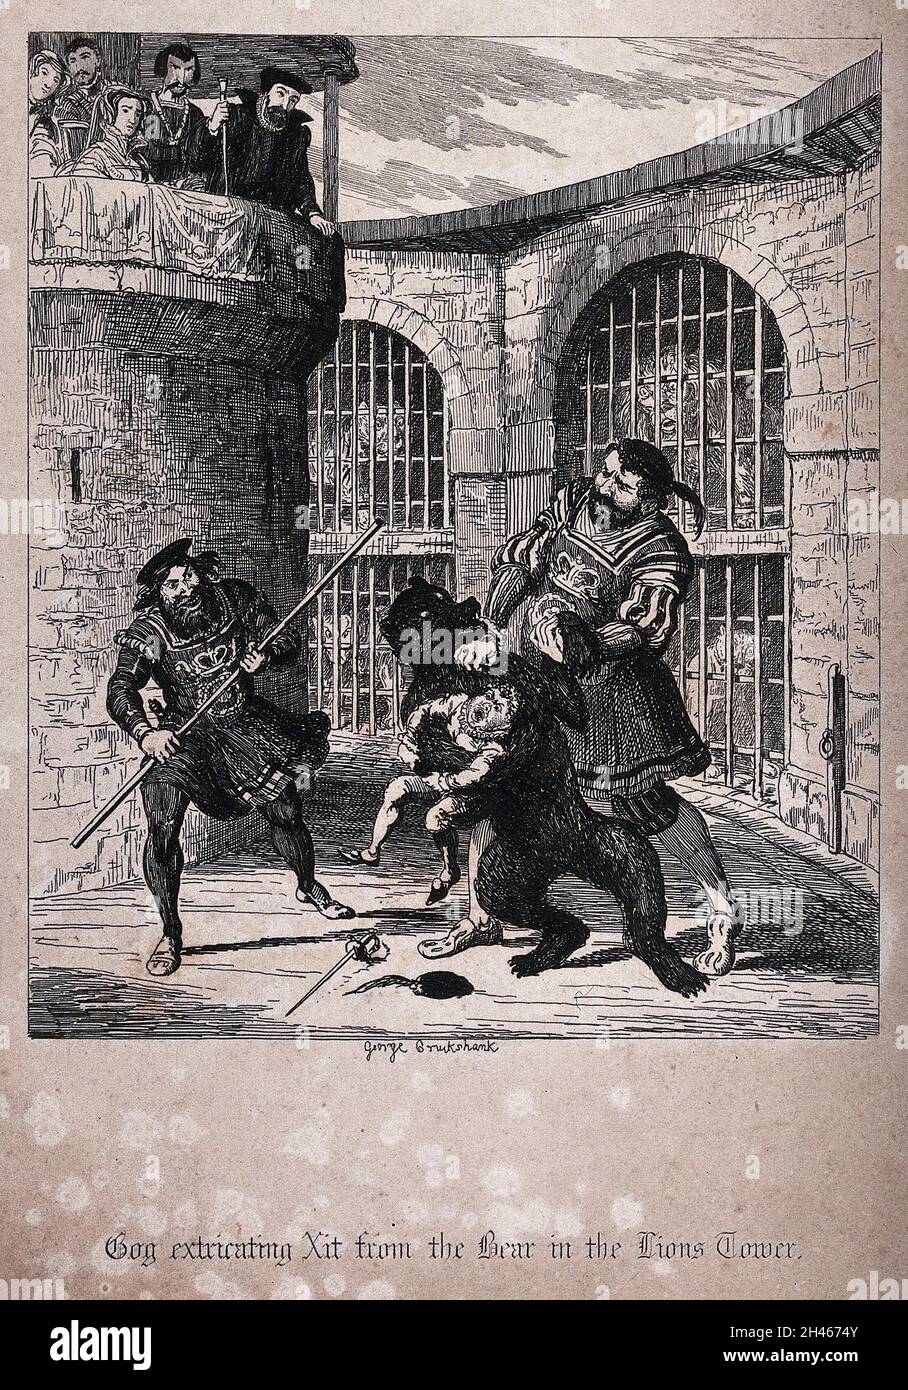 The giant Gog extricating the dwarf Xit from a bear in the Lions Tower at the Tower of London, watched by Queen Mary I. Etching by George Cruikshank. Stock Photo